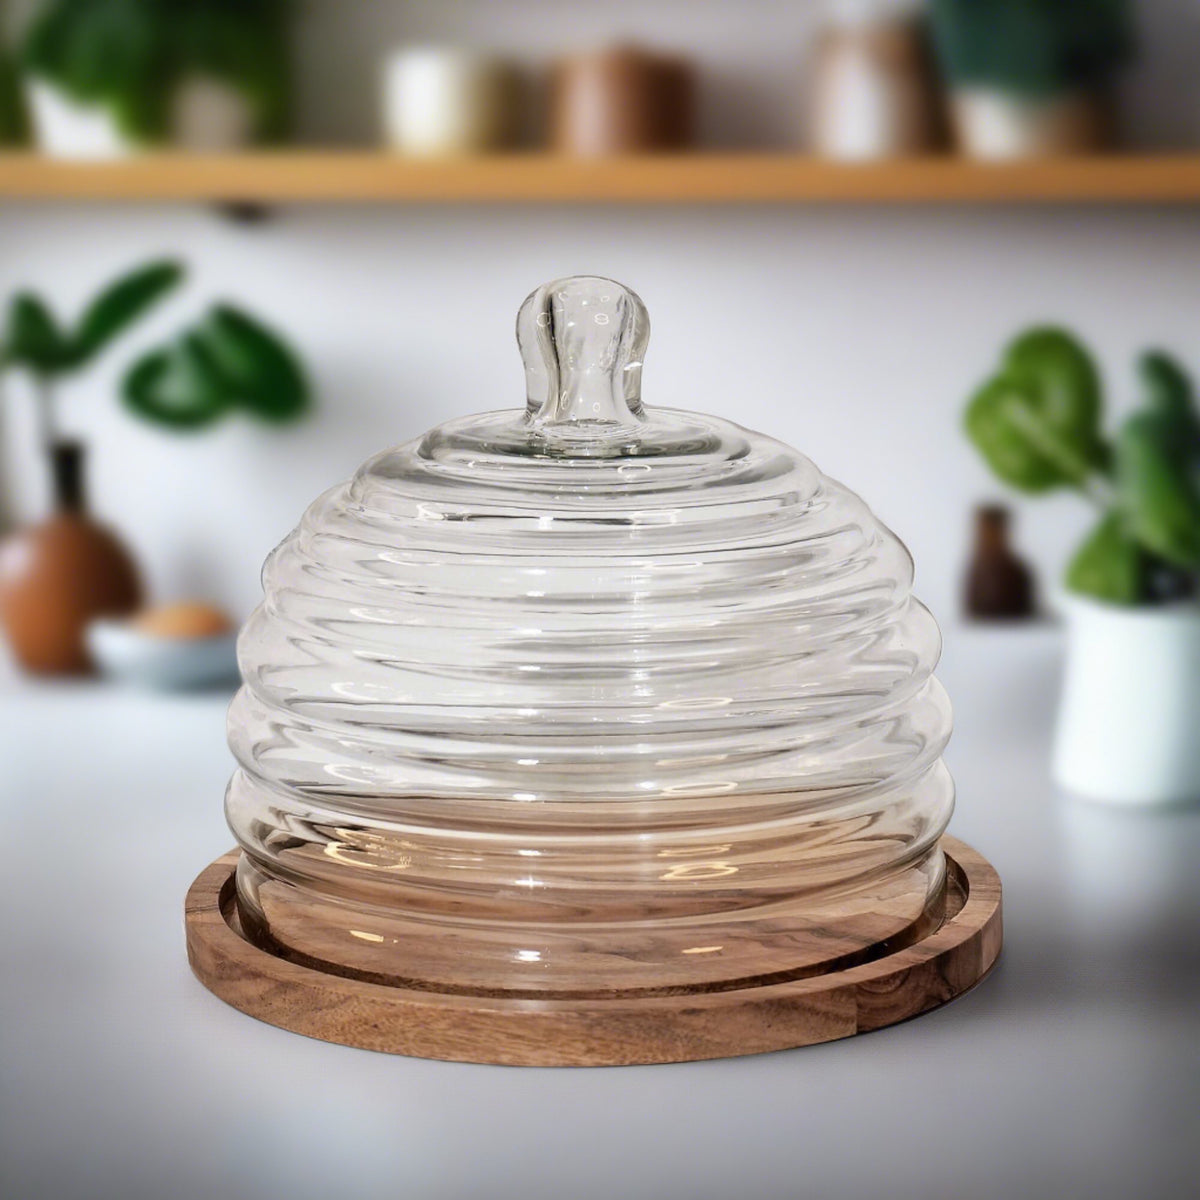 Bee hive cake dome with Wooden plate - 8 inch